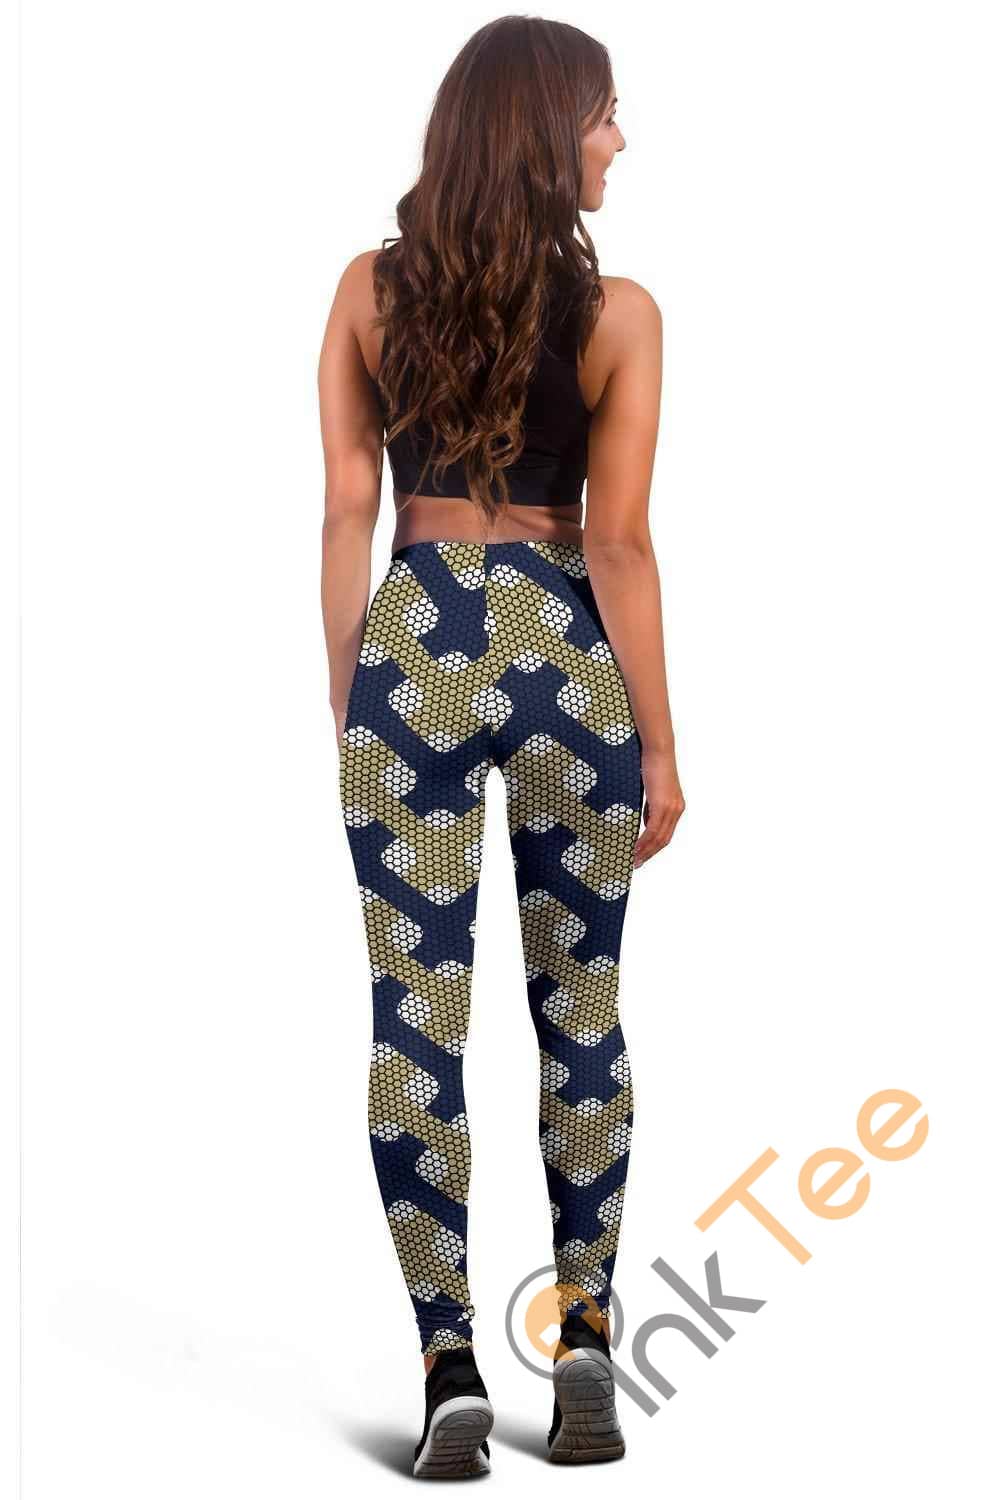 Inktee Store - Pitt Panthers Inspired Liberty 3D All Over Print For Yoga Fitness Fashion Women'S Leggings Image